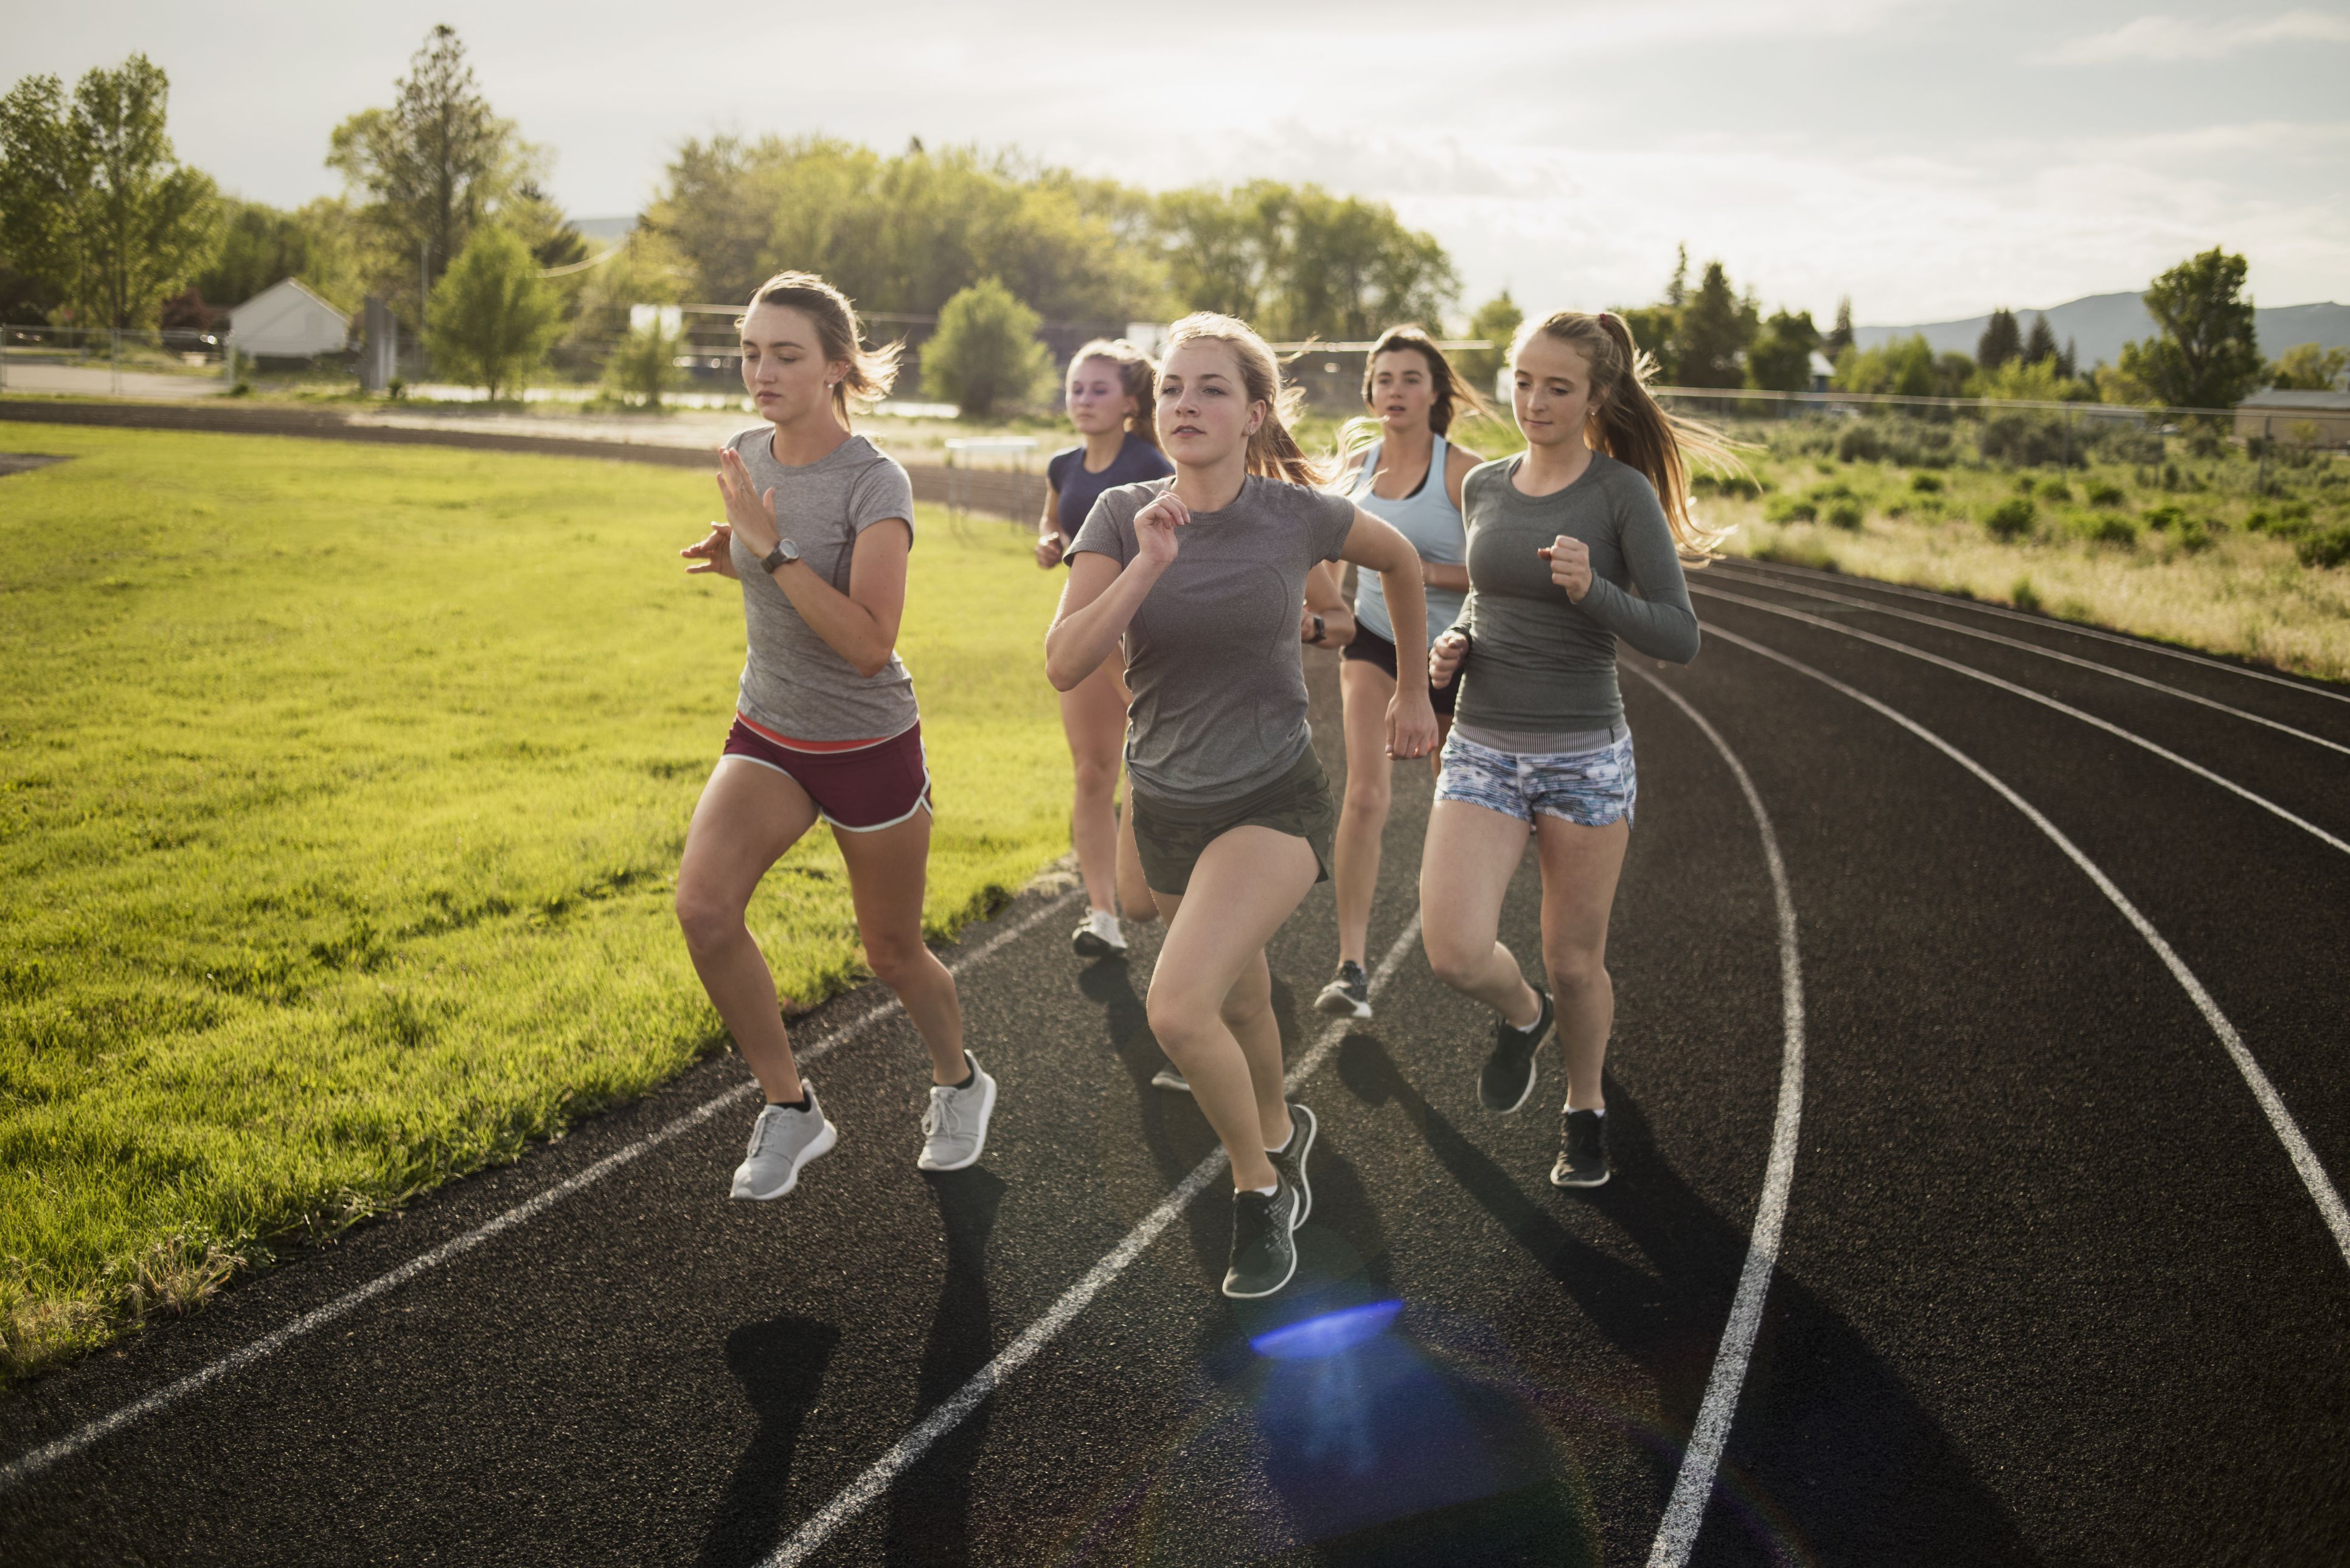 https://hips.hearstapps.com/hmg-prod/images/young-women-runners-rounding-turn-on-track-royalty-free-image-656982959-1536591323.jpg